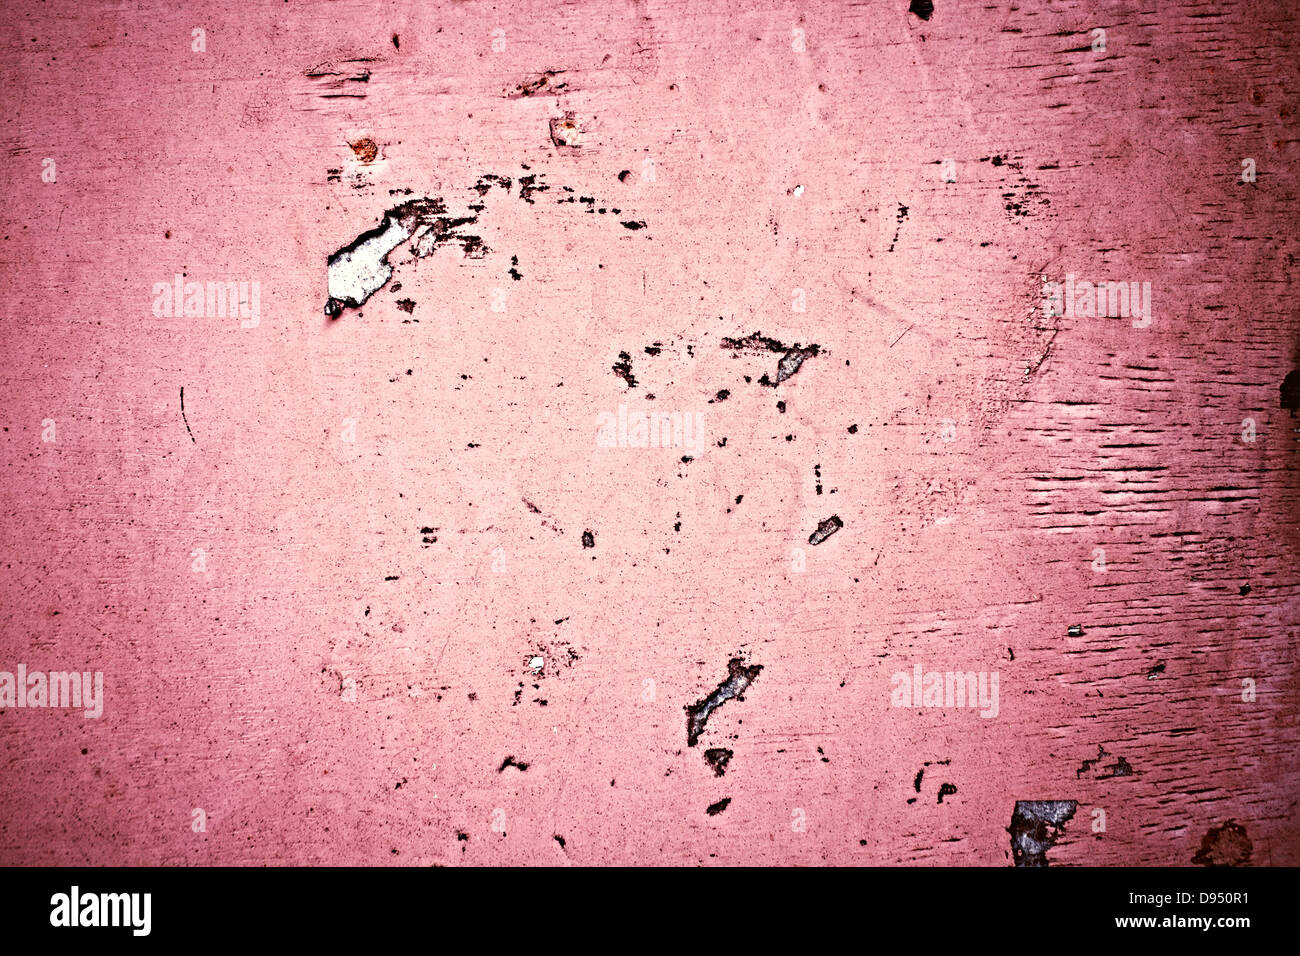 The old concrete pink wall with pink scraps of paper ads Stock Photo